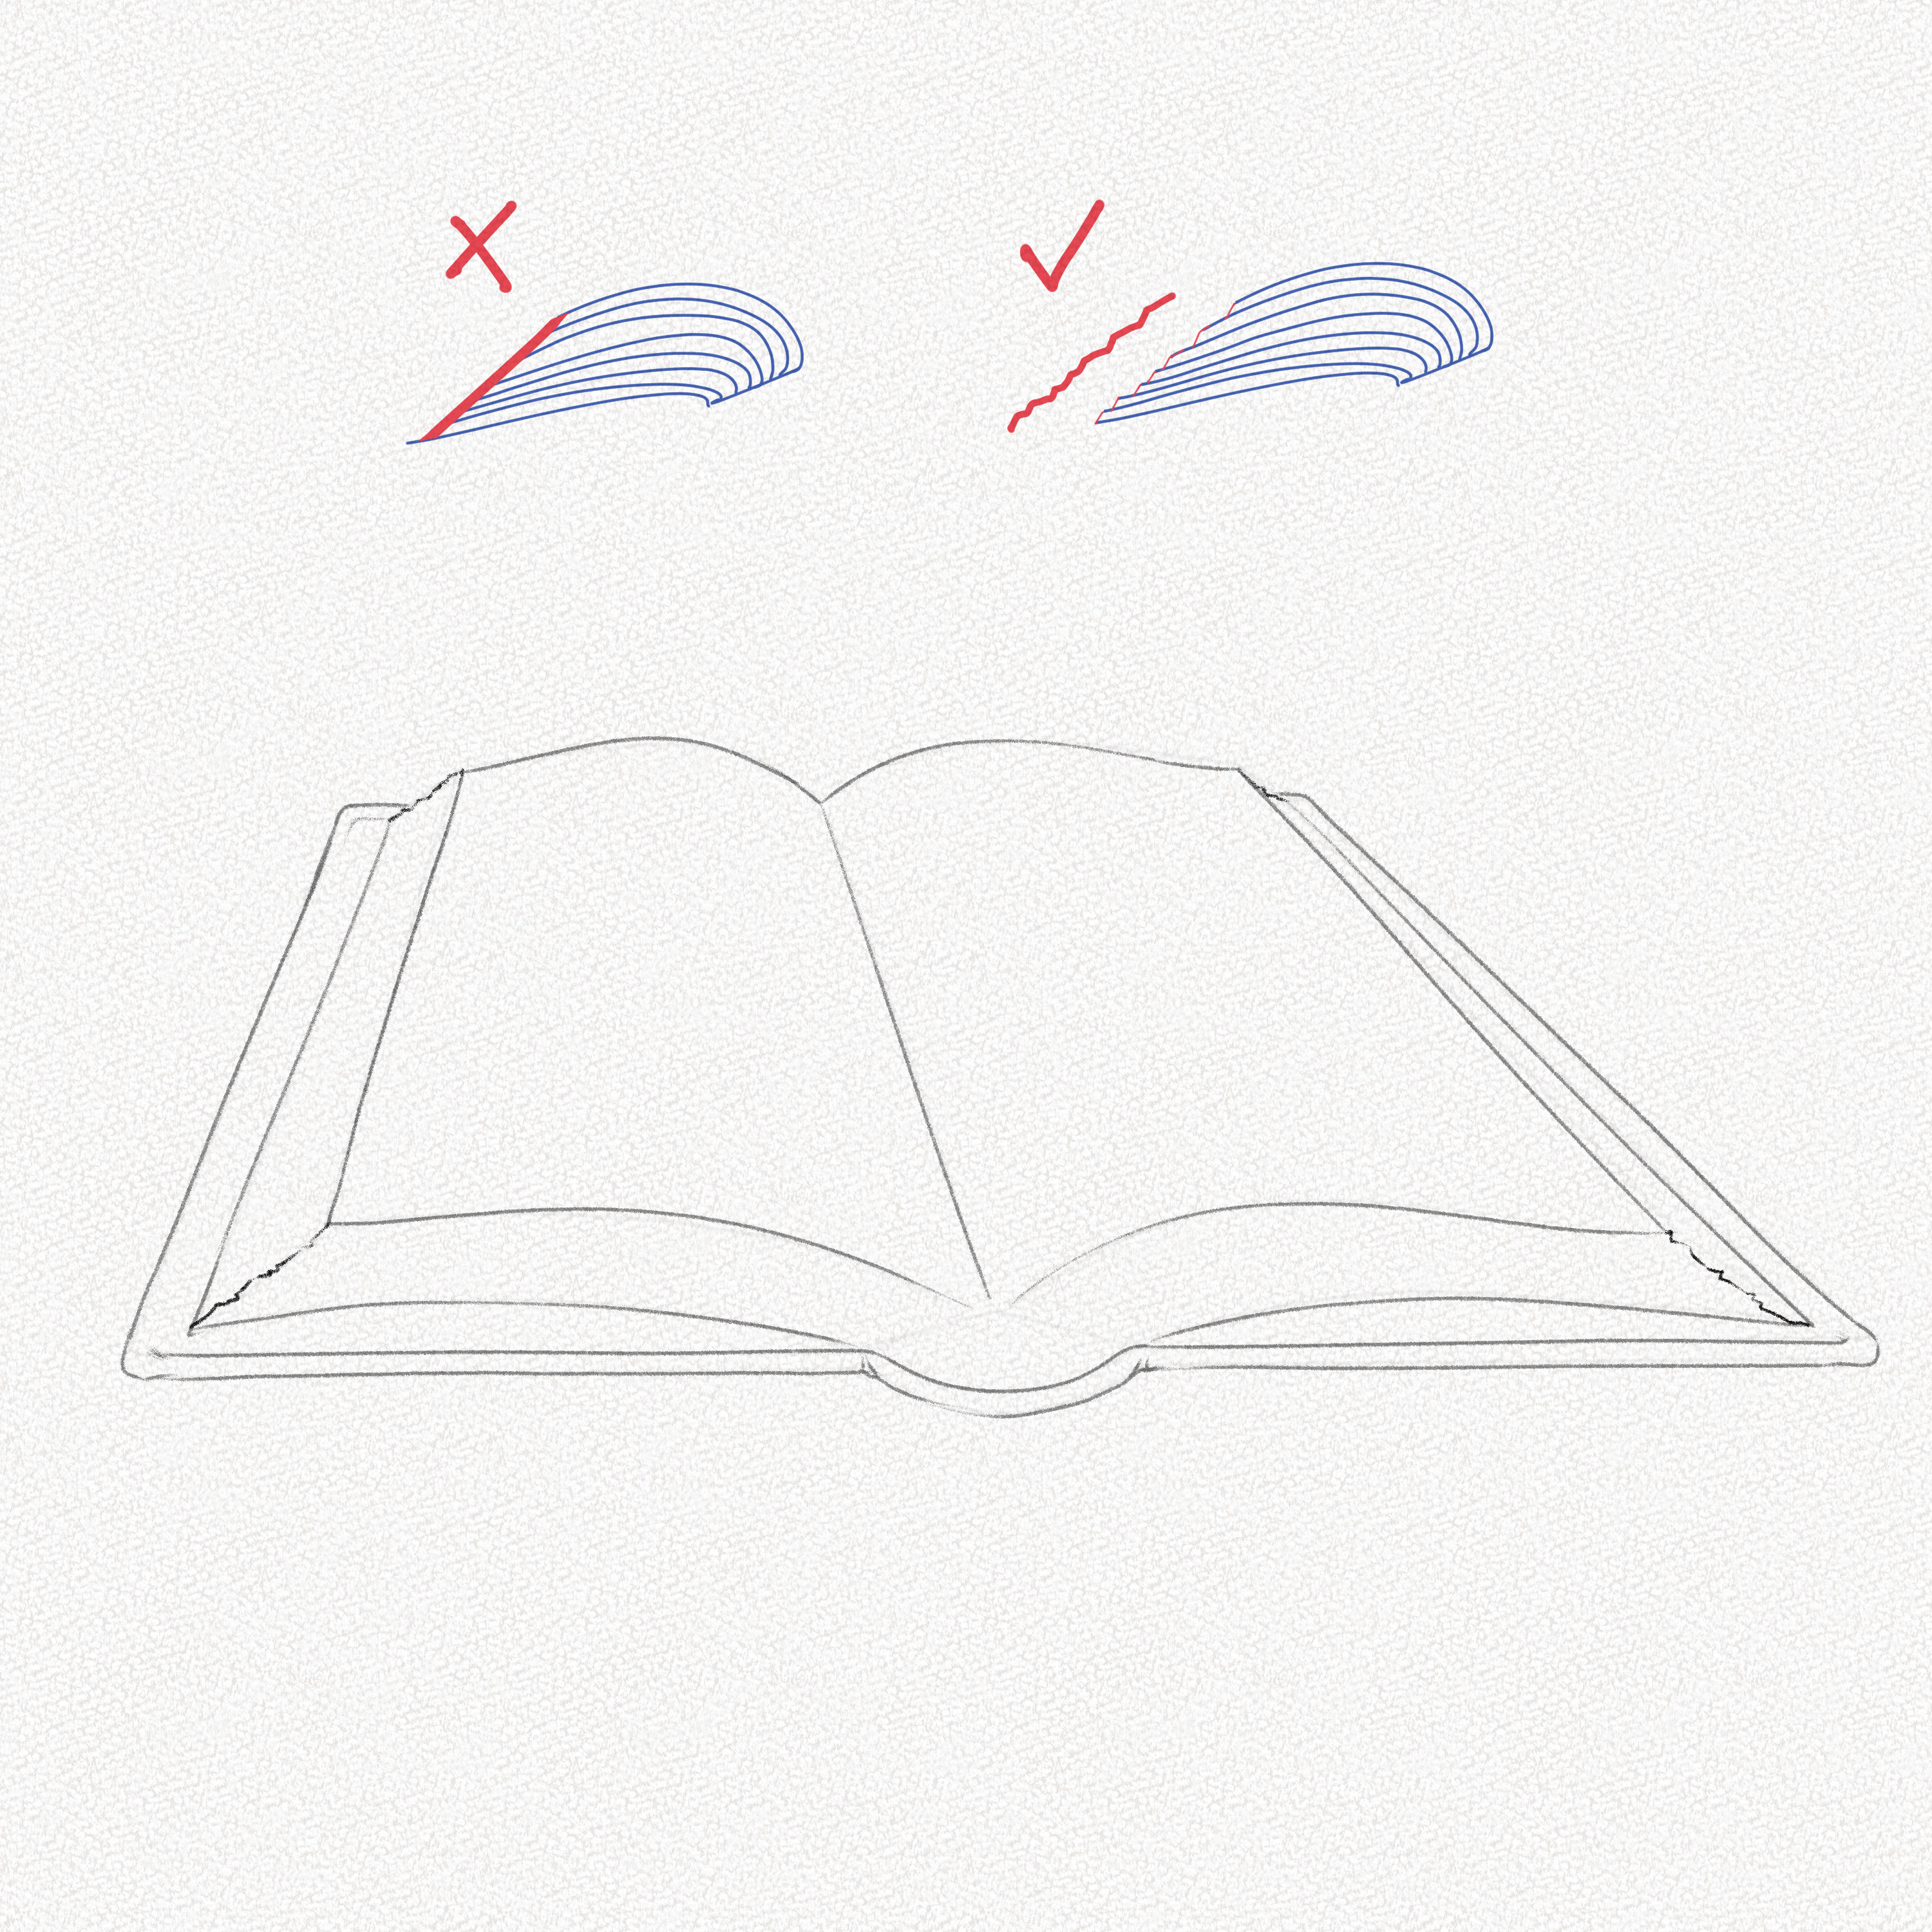 How to Draw a Book Sketch: Step by Step Open Book Outline Drawing, open book  drawing 